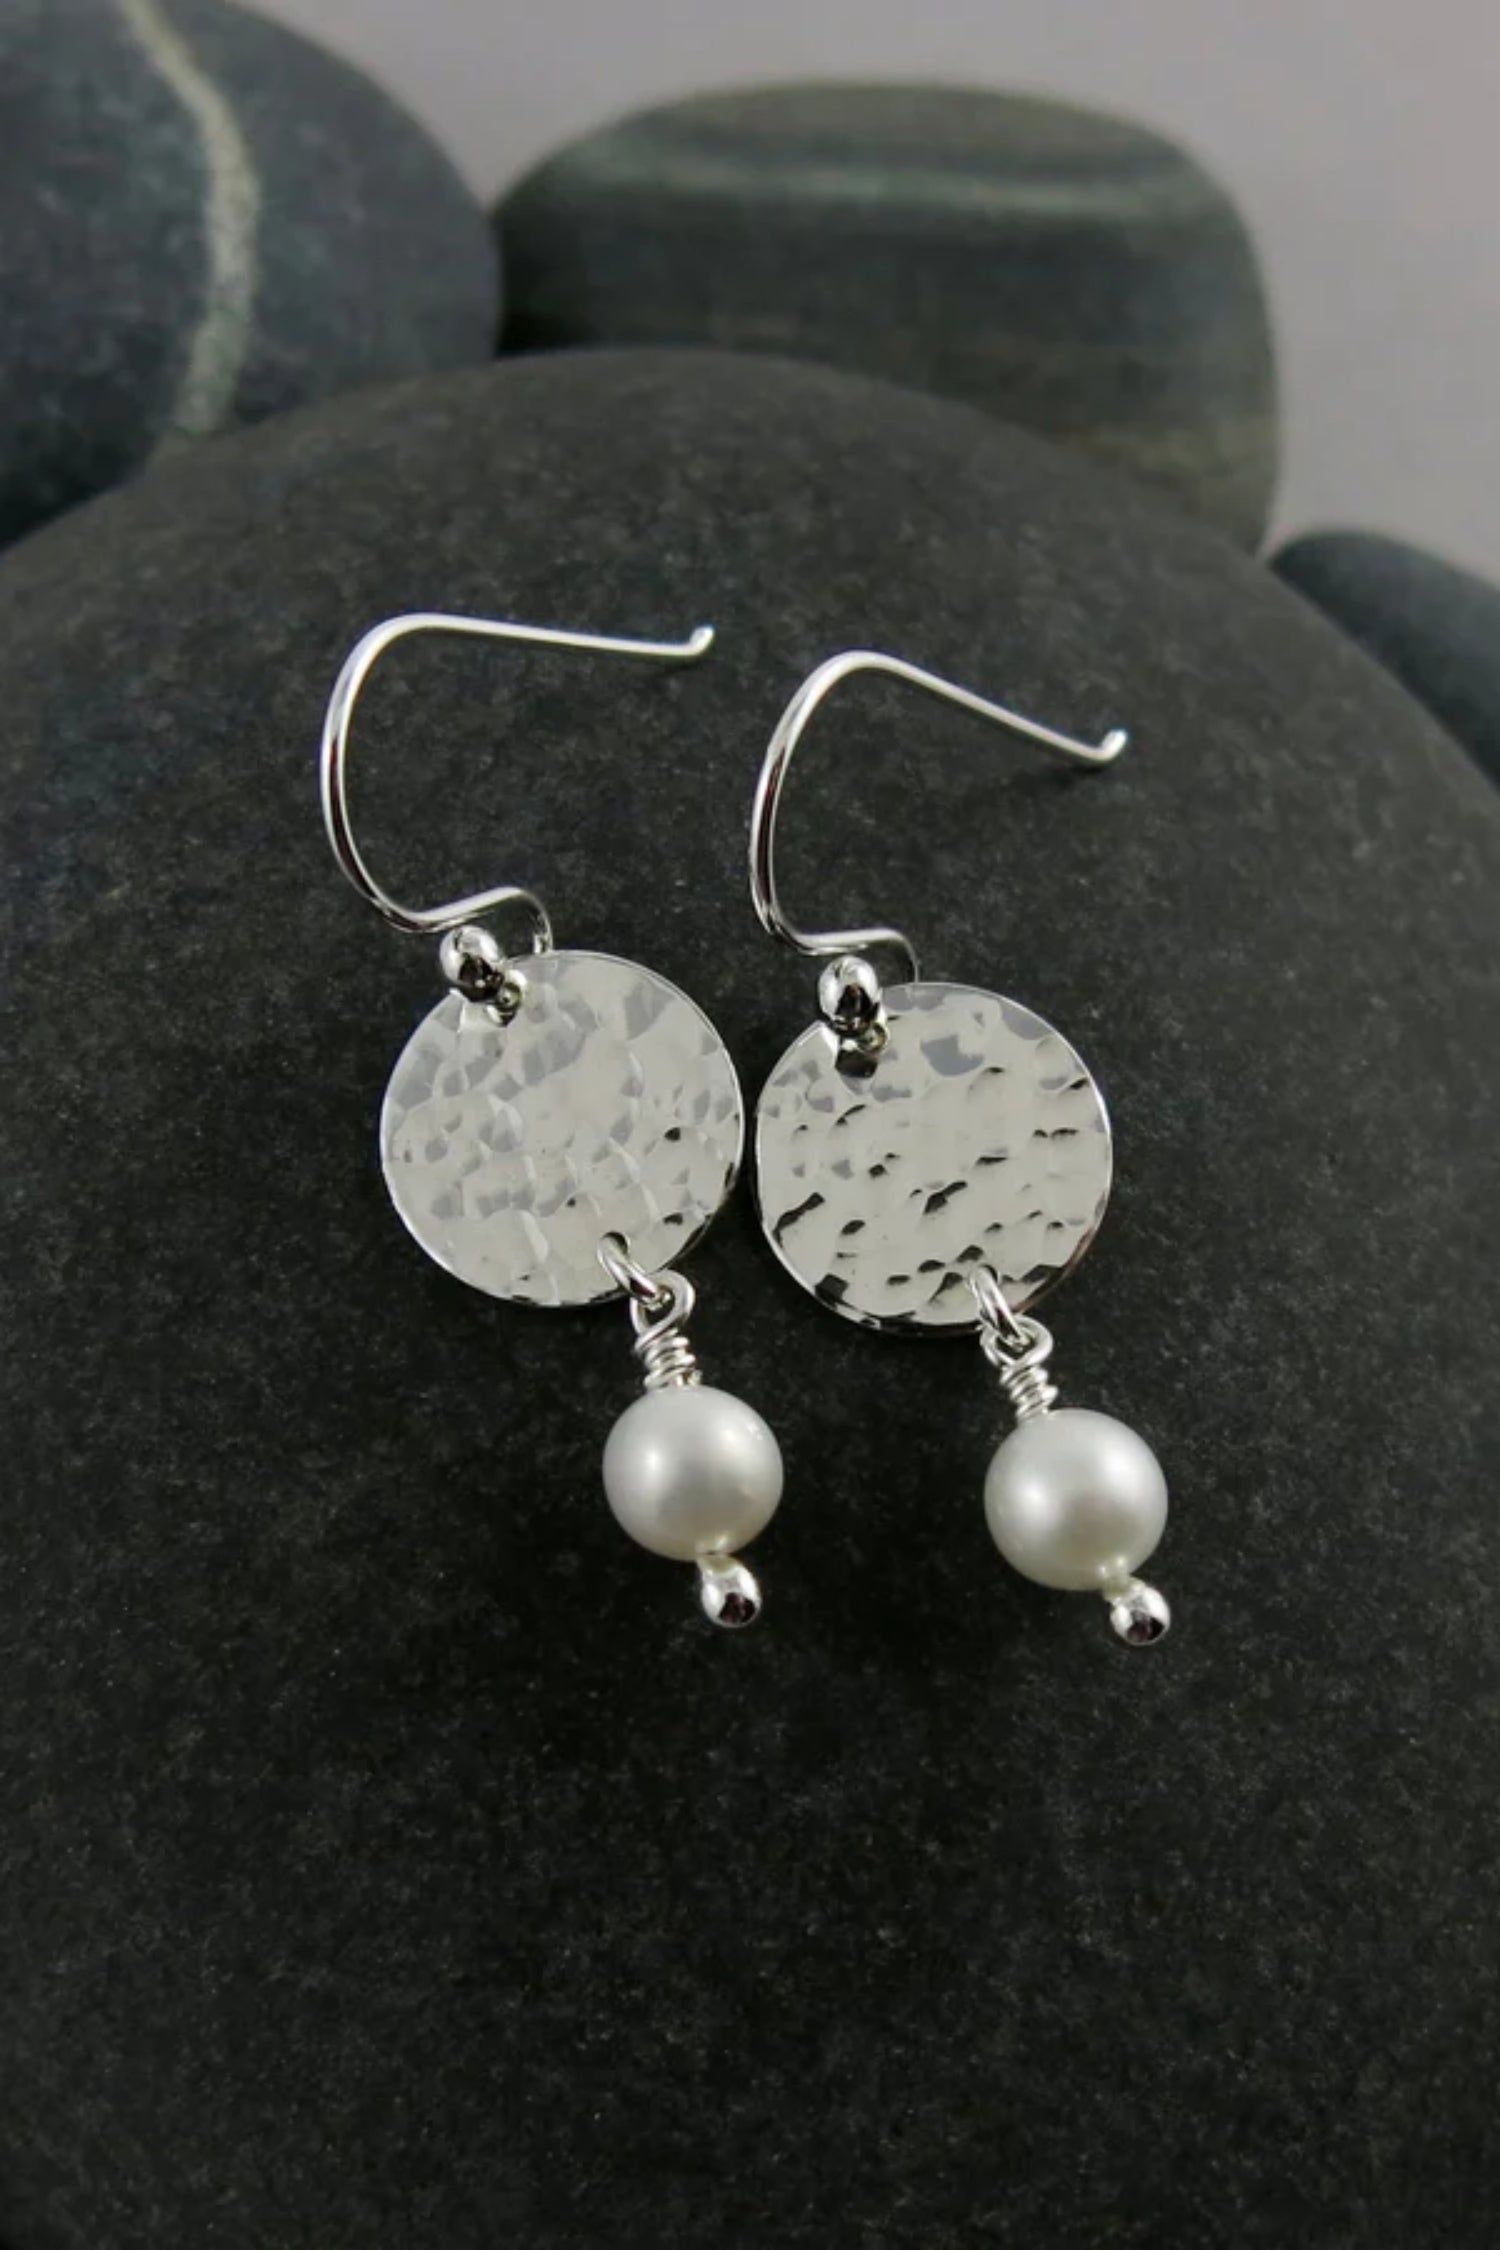 Pearl Moondrop Earrings - White freshwater pearls and sterling silver by Mikel Grant, made in Sechelt BC 